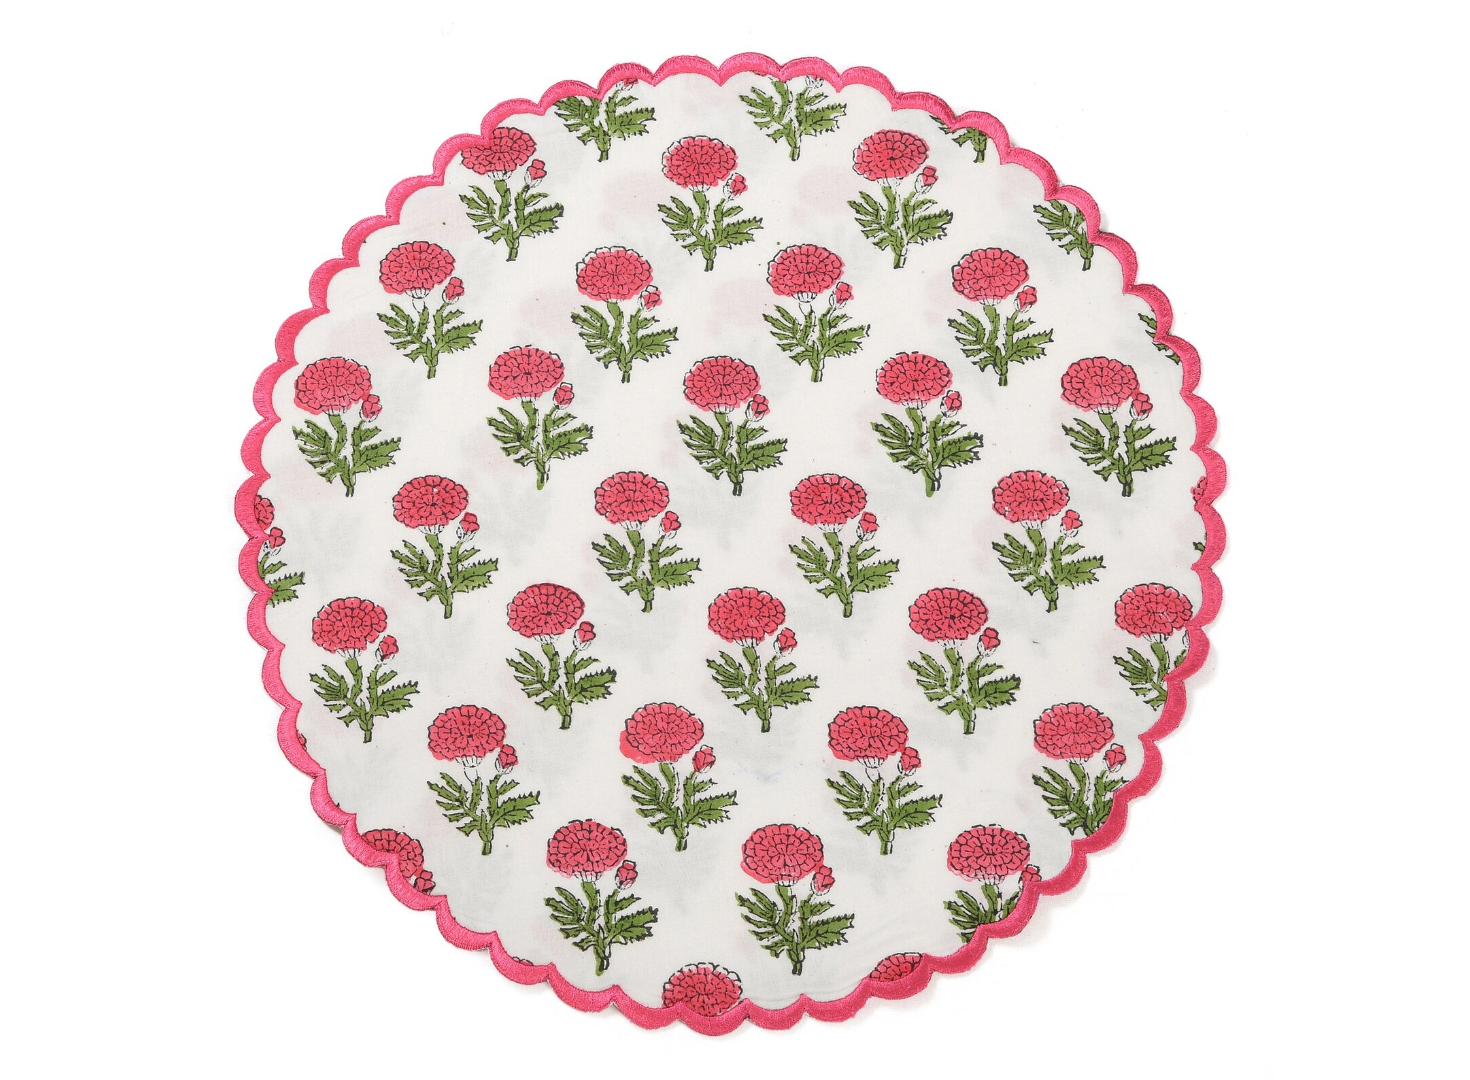 Set of 4 I Pink Floral Round Scalloped Edge Embroidered Placemat I Table Mats I Cotton Placemat I Table Linen I Tablecloth - DharBazaar